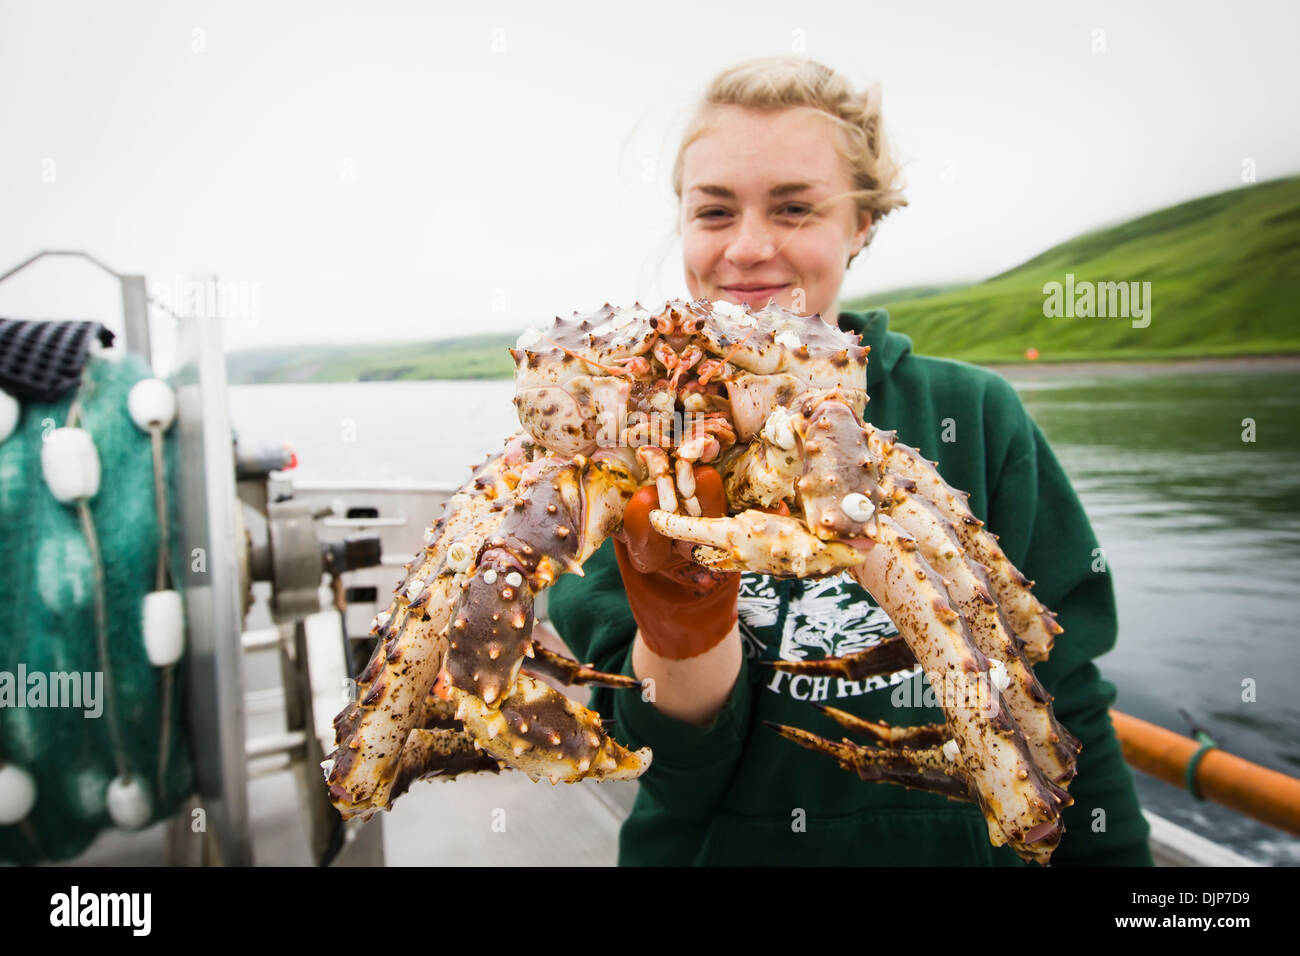 Commercial Fishing Deckhand Emma Teal Laukitis, Hold Up A Live Bristol Bay Red King Crab On A Boat In Isanotski Strait Stock Photo